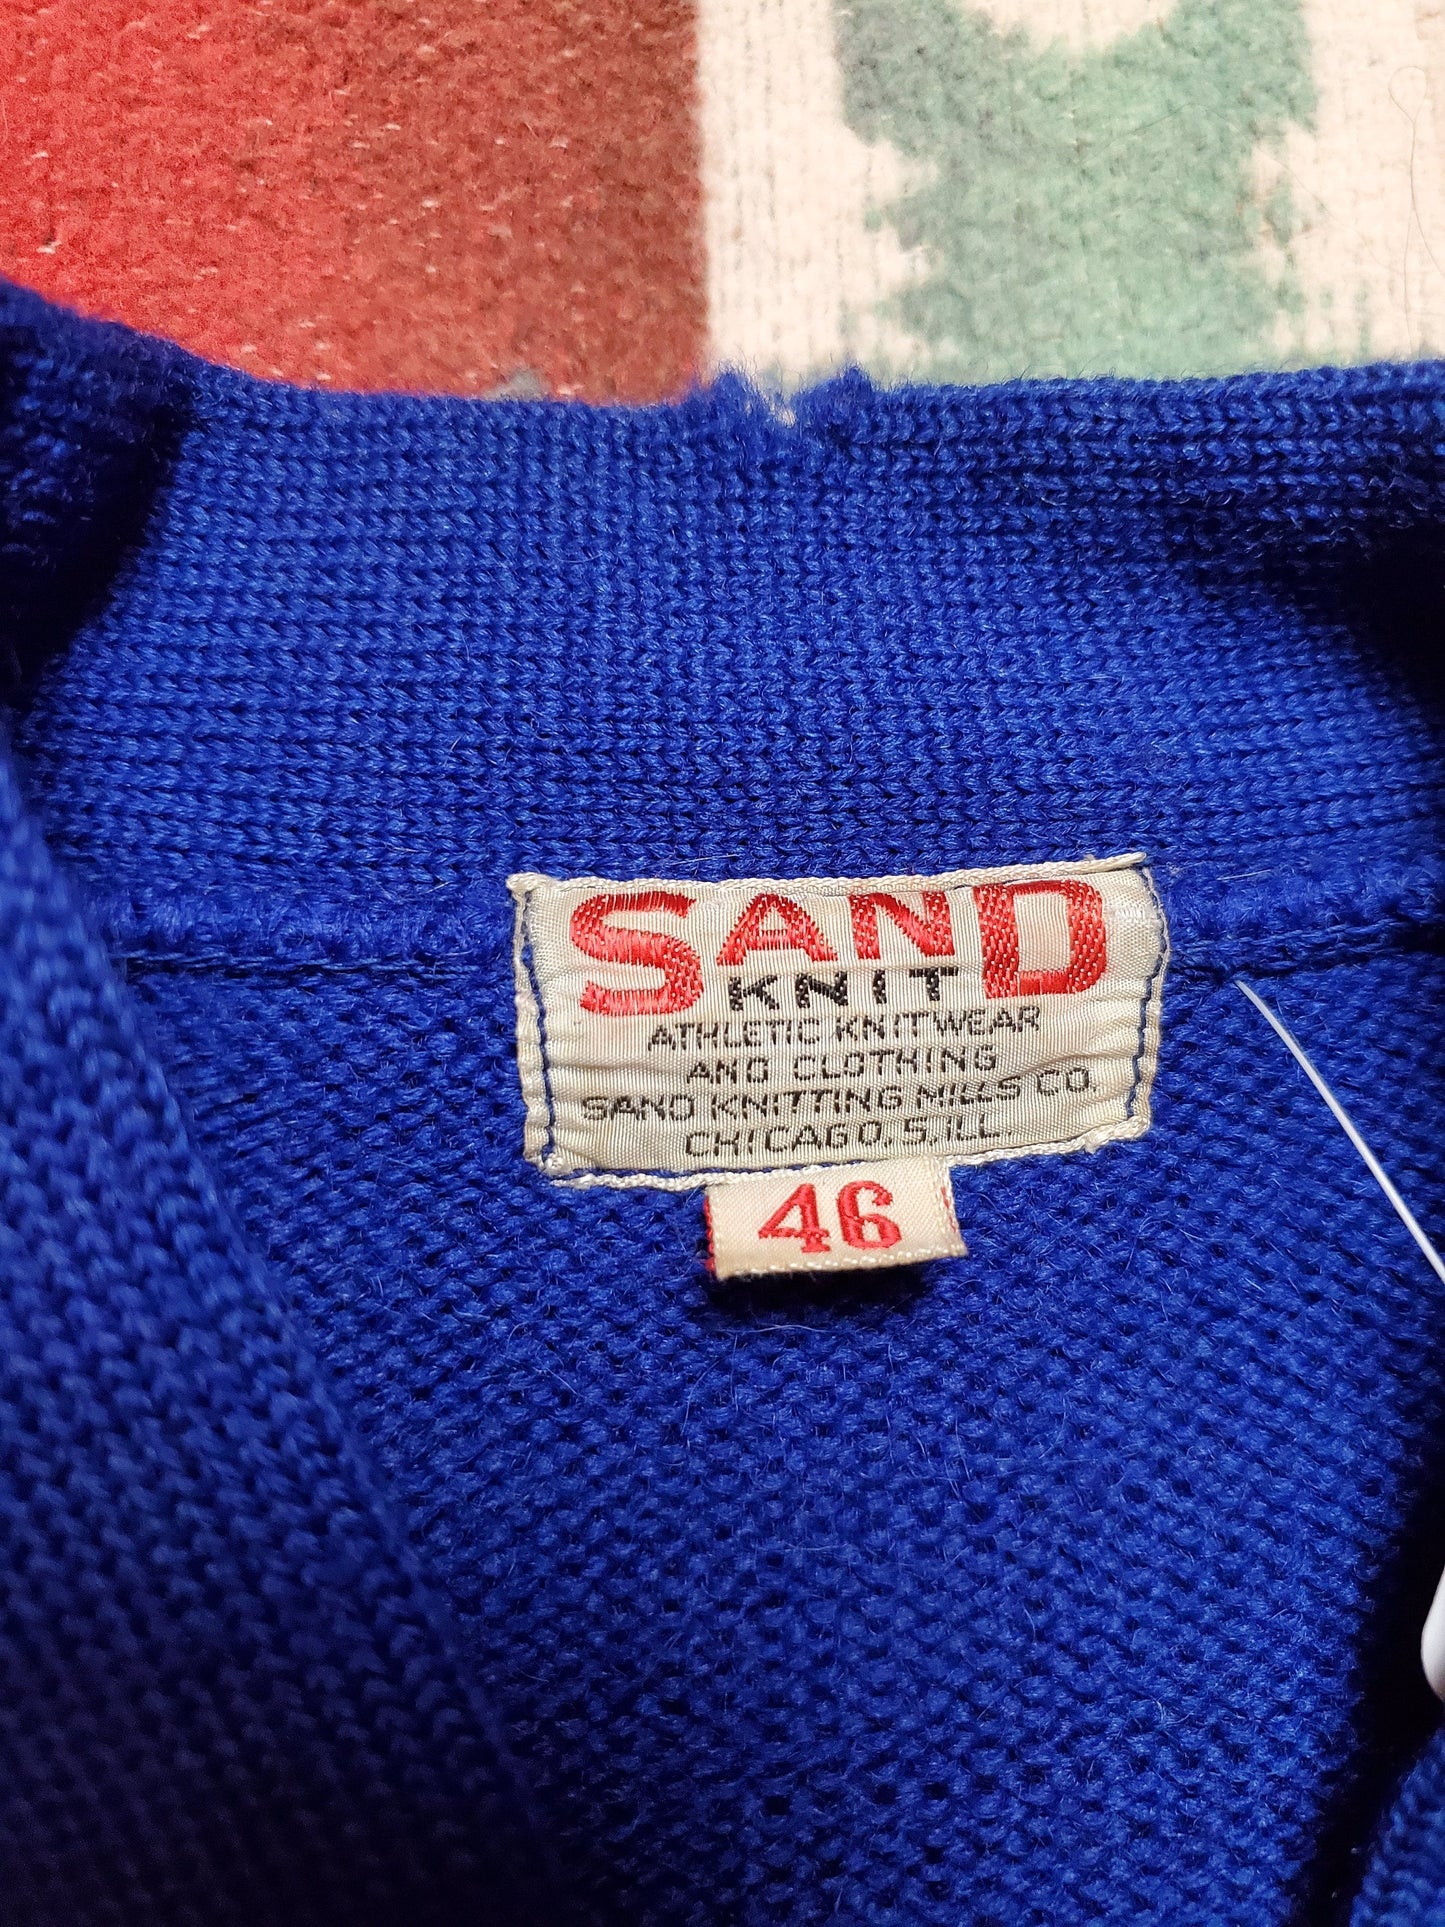 1940s/1950s Sand Knit Blue Varsity Cardigan Sweater Made in USA Size M/L